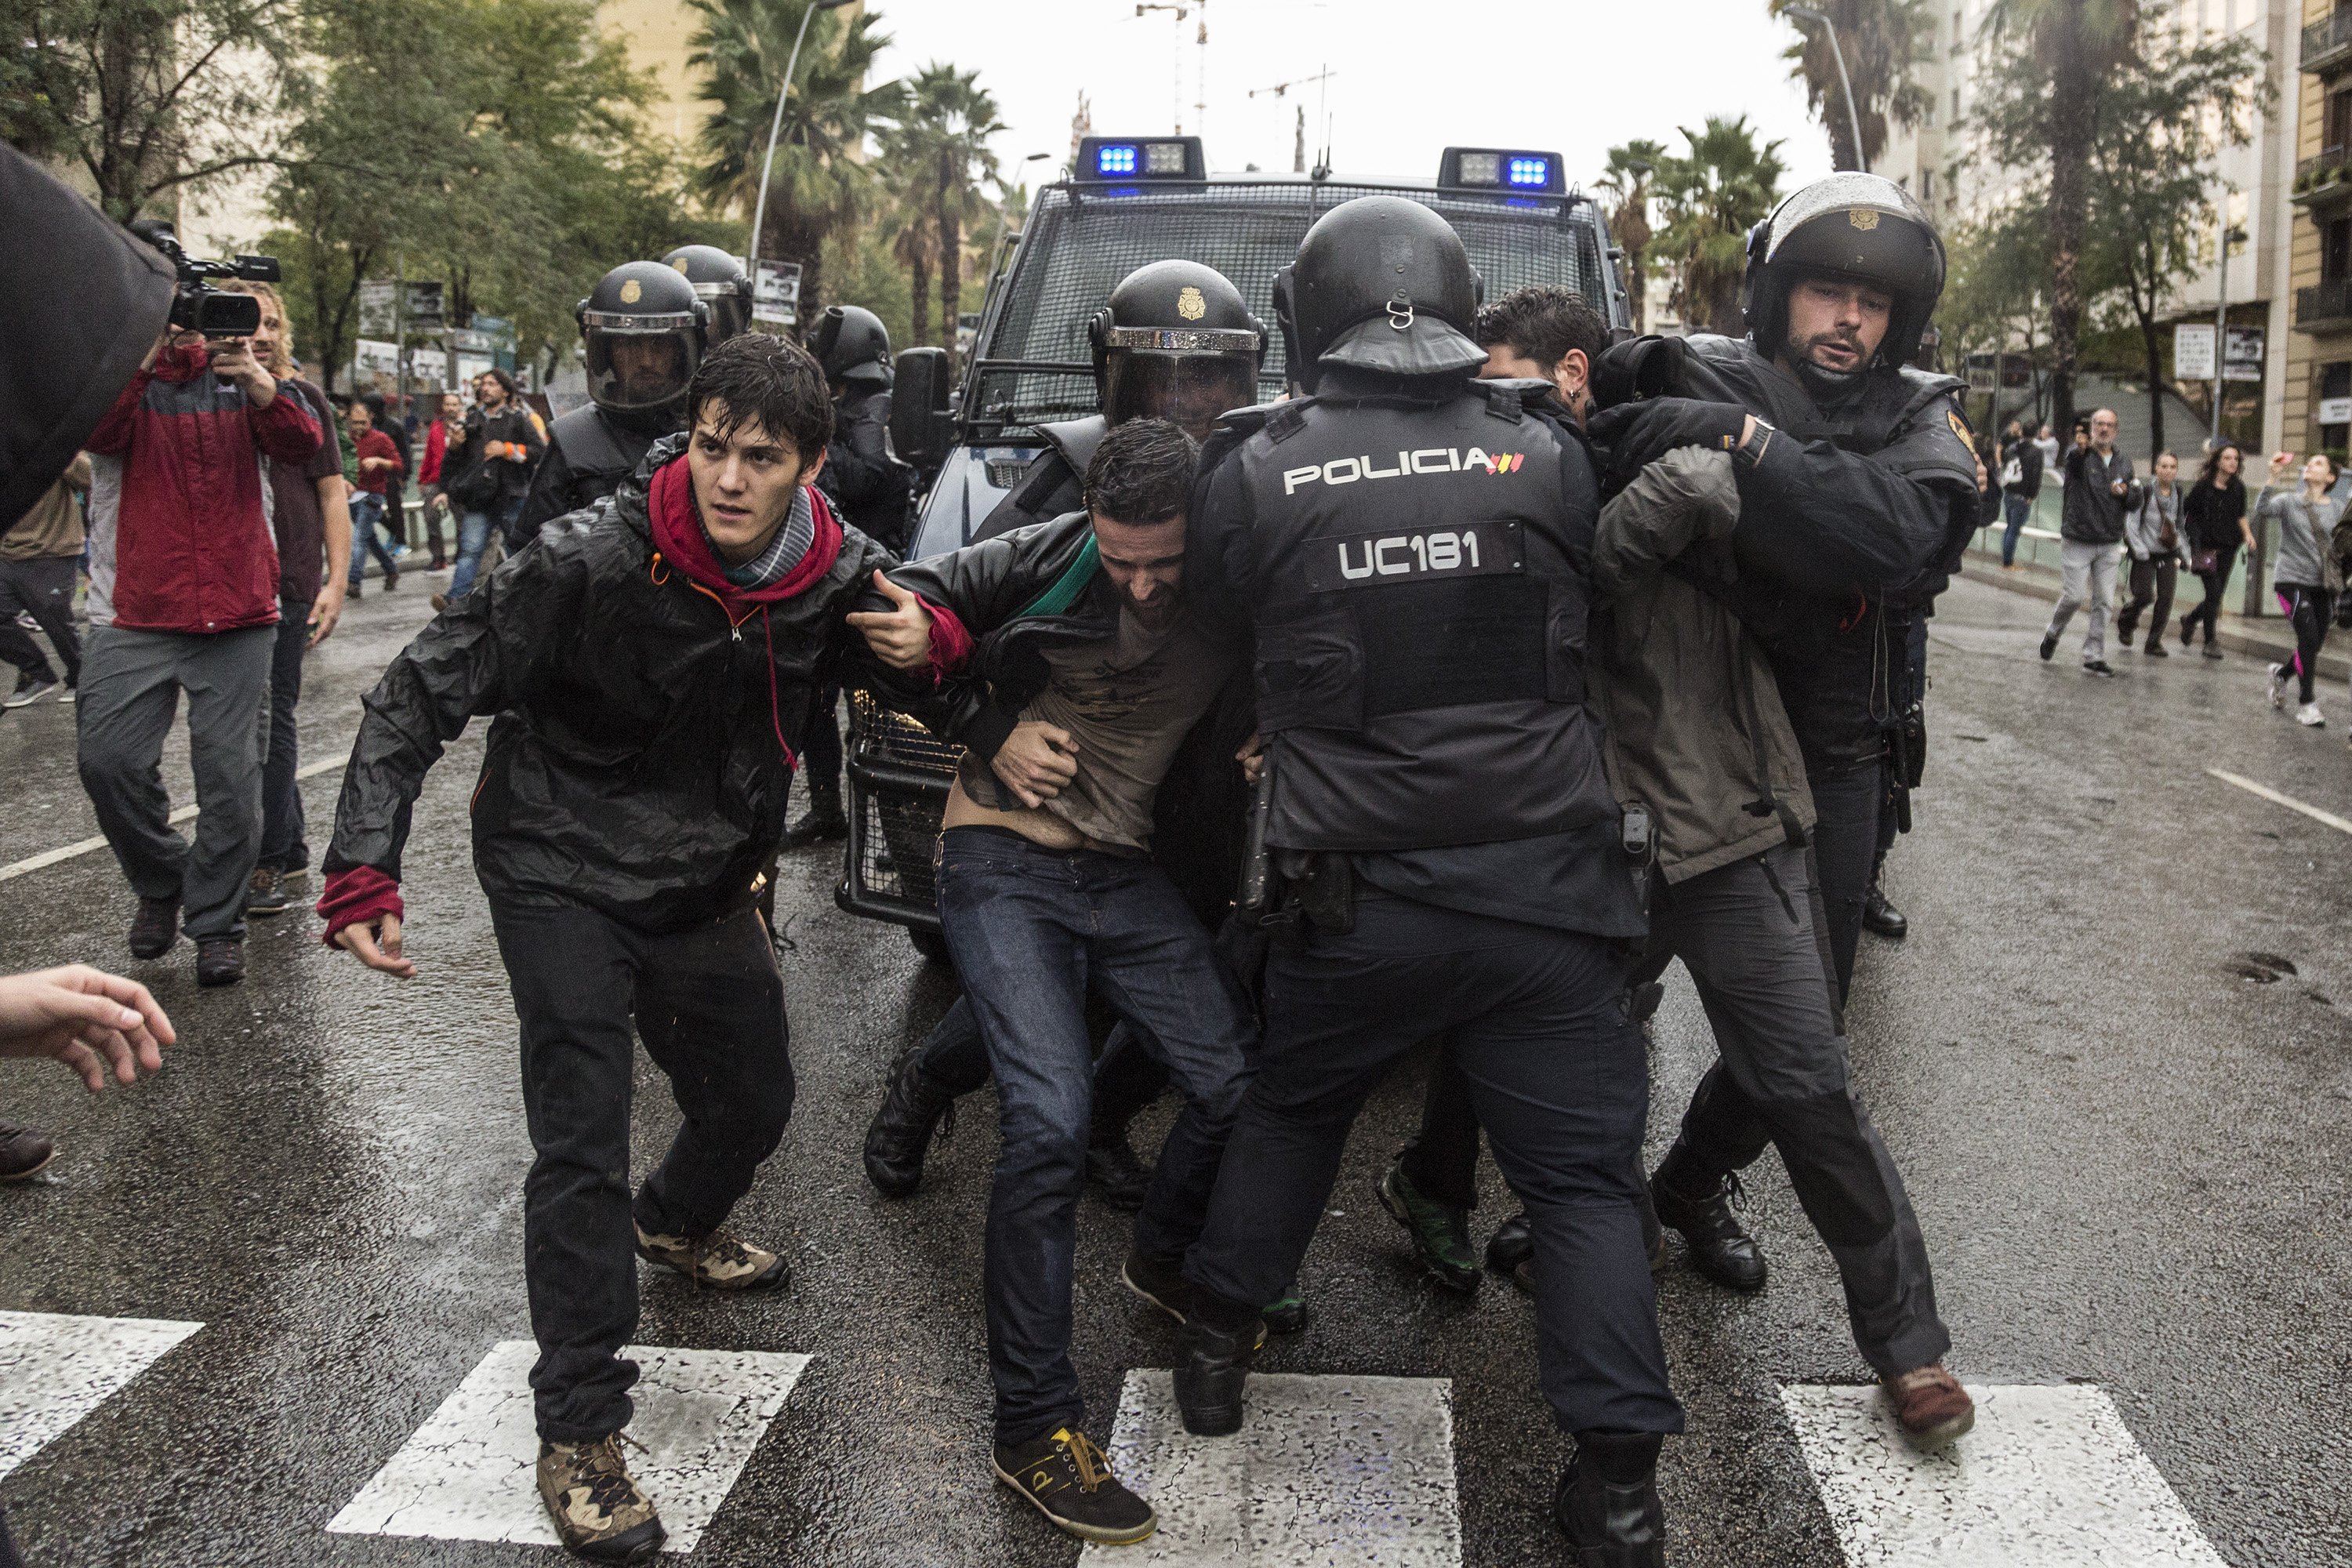 Human Rights Watch on "excessive use of force" in Catalonia